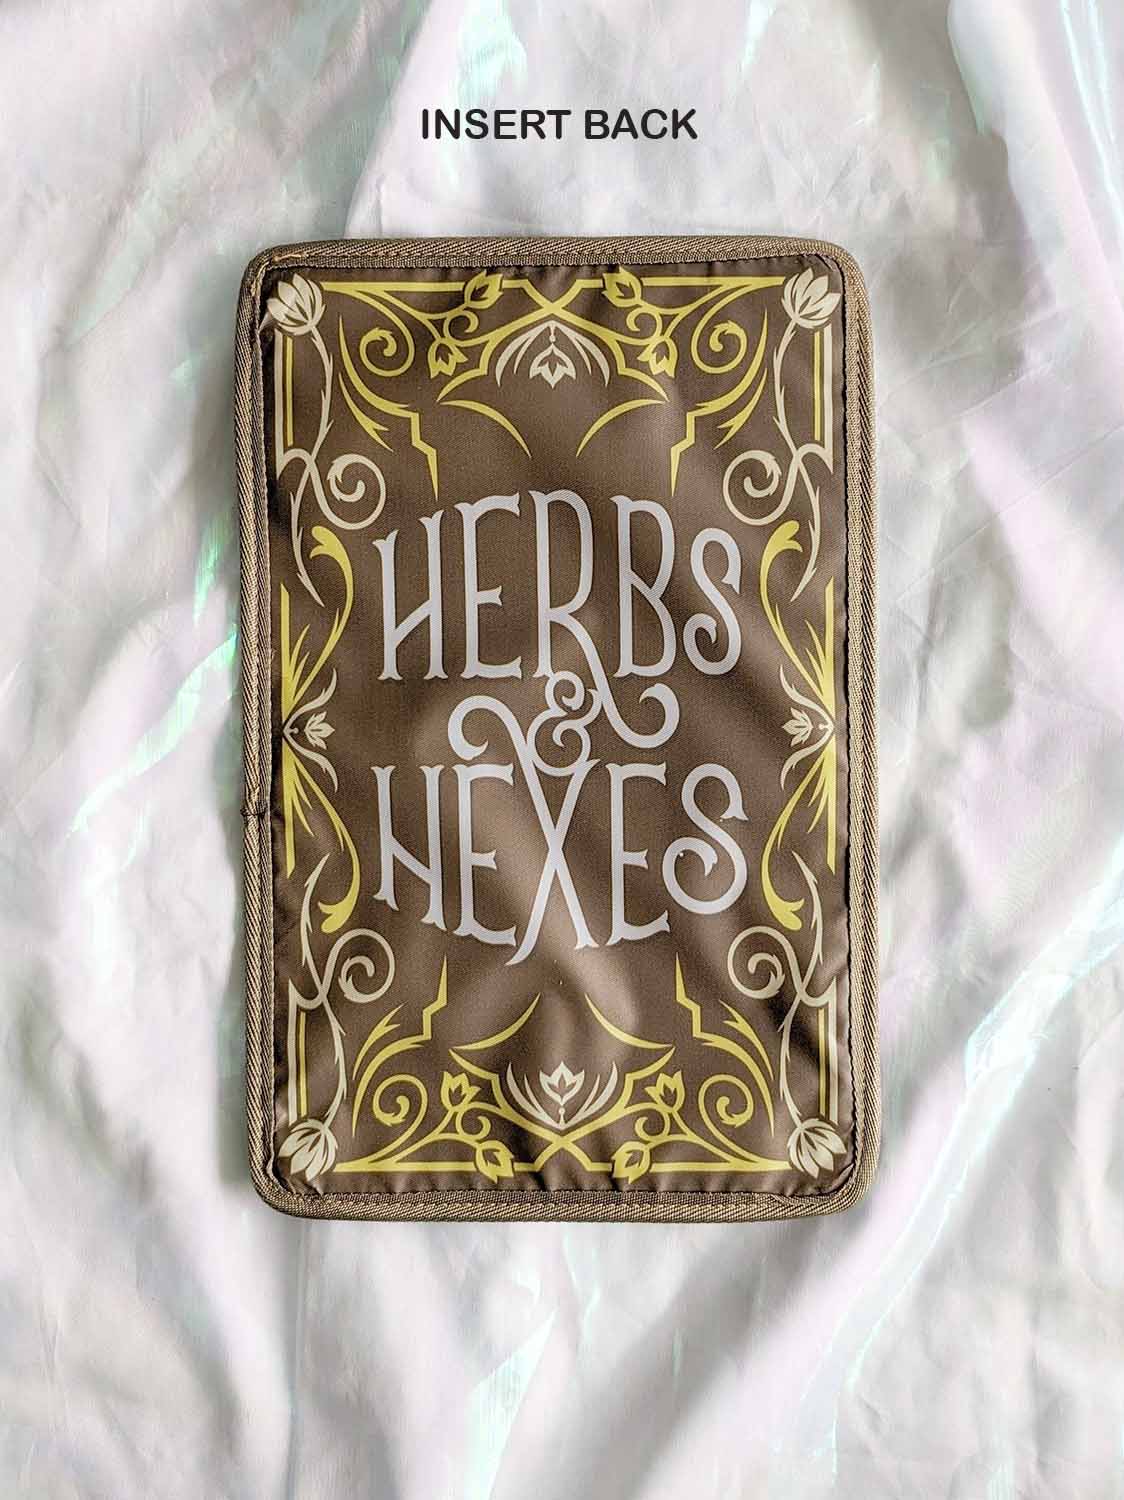 Brown Bookish Ita Bag Insert Herbs and Hexes